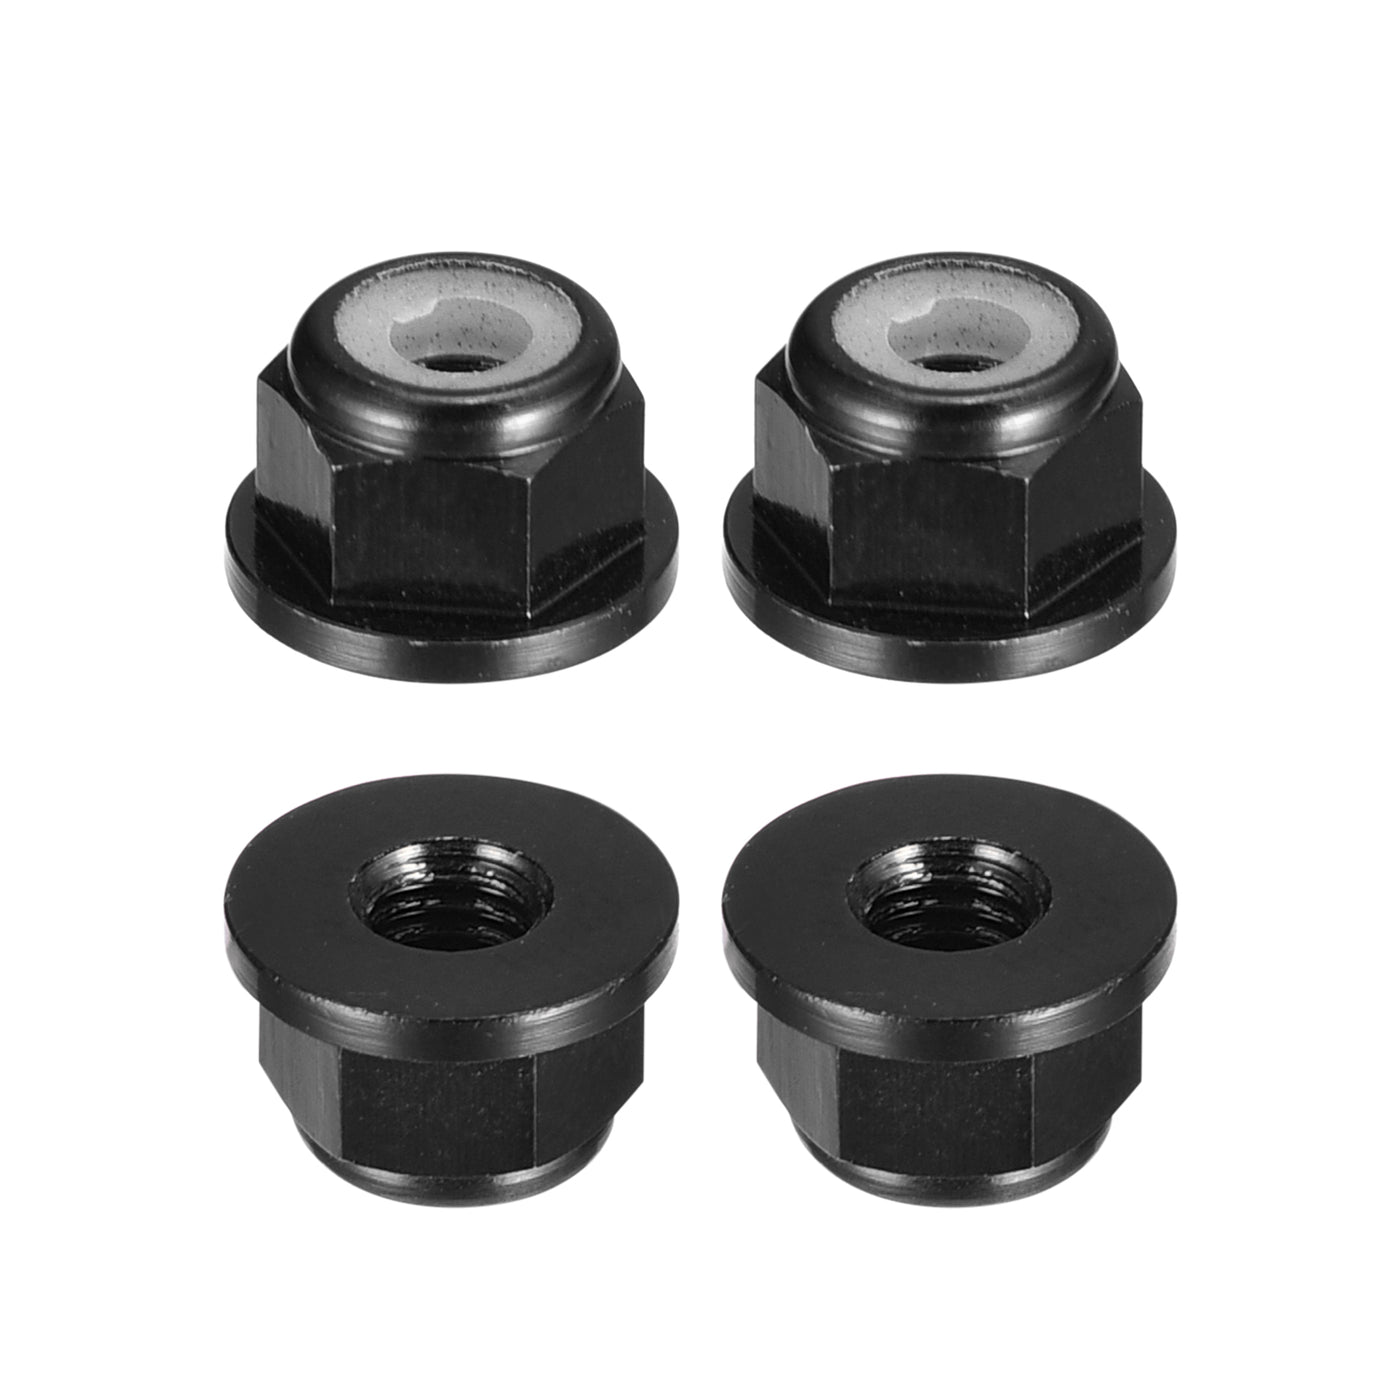 uxcell Uxcell Nylon Insert Hex Lock Nuts, 4pcs - M3 x 0.5mm Aluminum Alloy Self-Locking Nut, Anodizing Flange Lock Nut for Fasteners (Black)